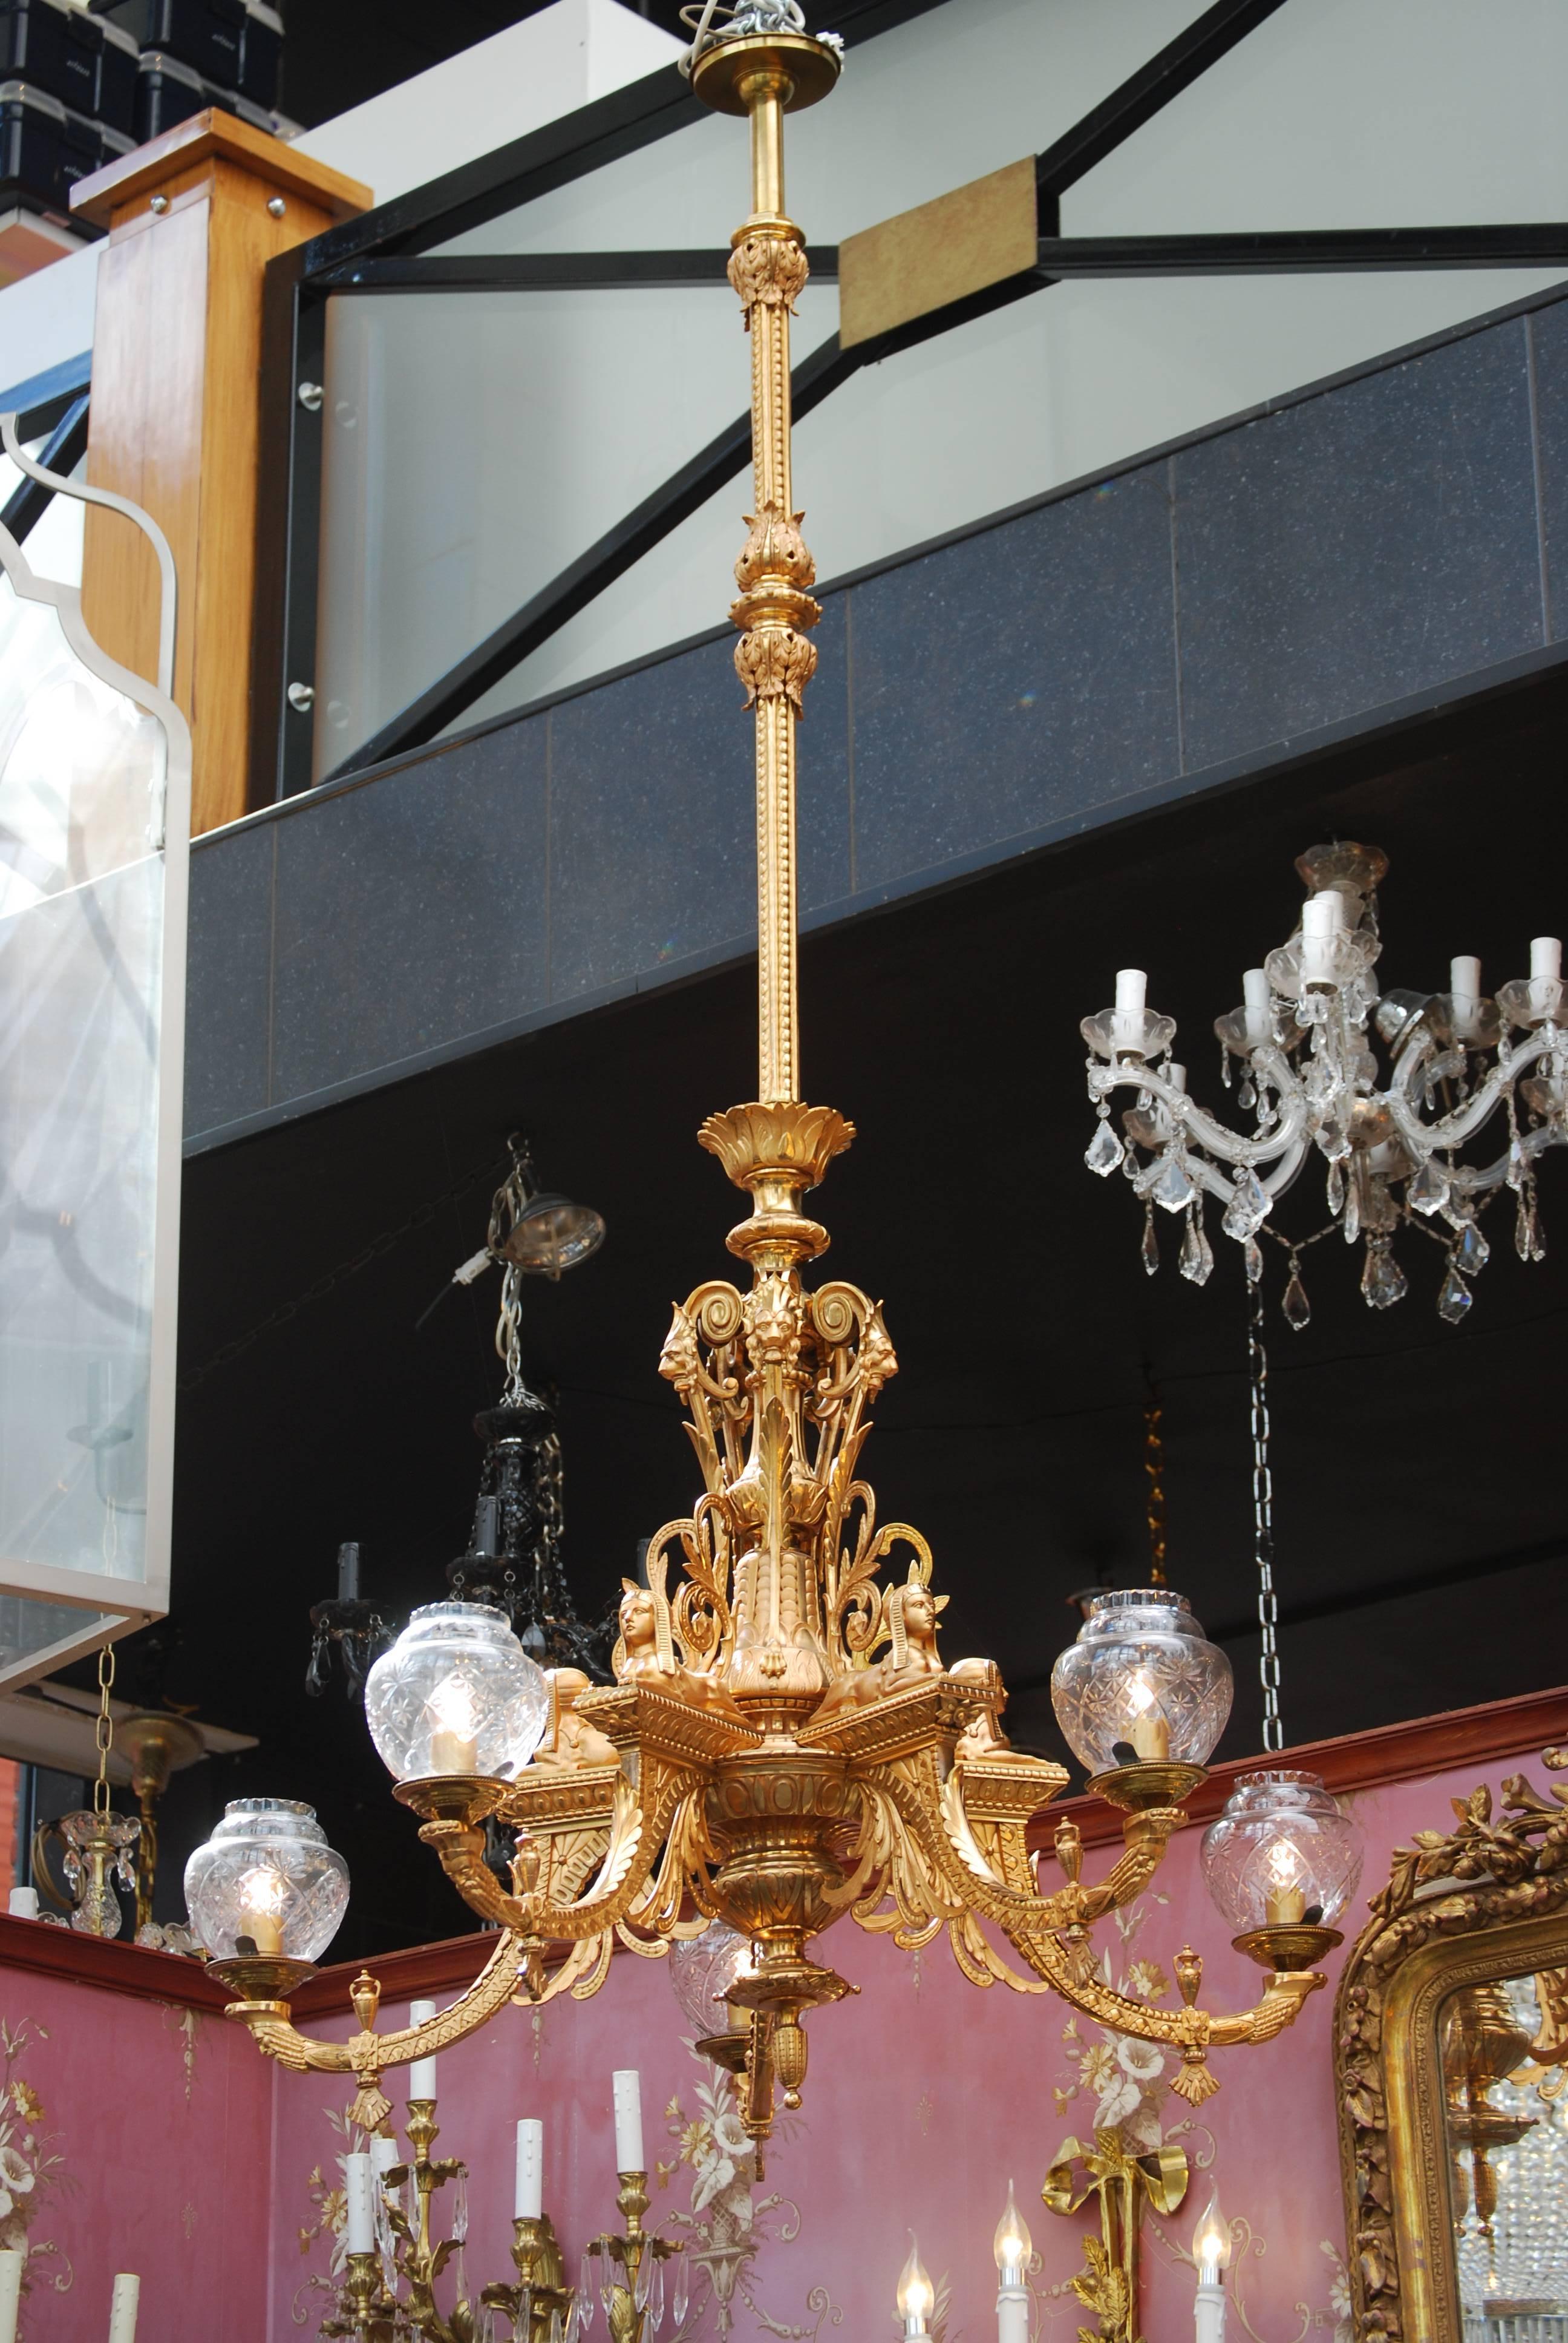 This extremely rare Empire style ormolu five lights gas chandelier has five sphinxes on top of the arms.
The Egyptian ornaments are well represented.
On the top base there has been an inscription from the designer, see photo.
ThIs chandelier is